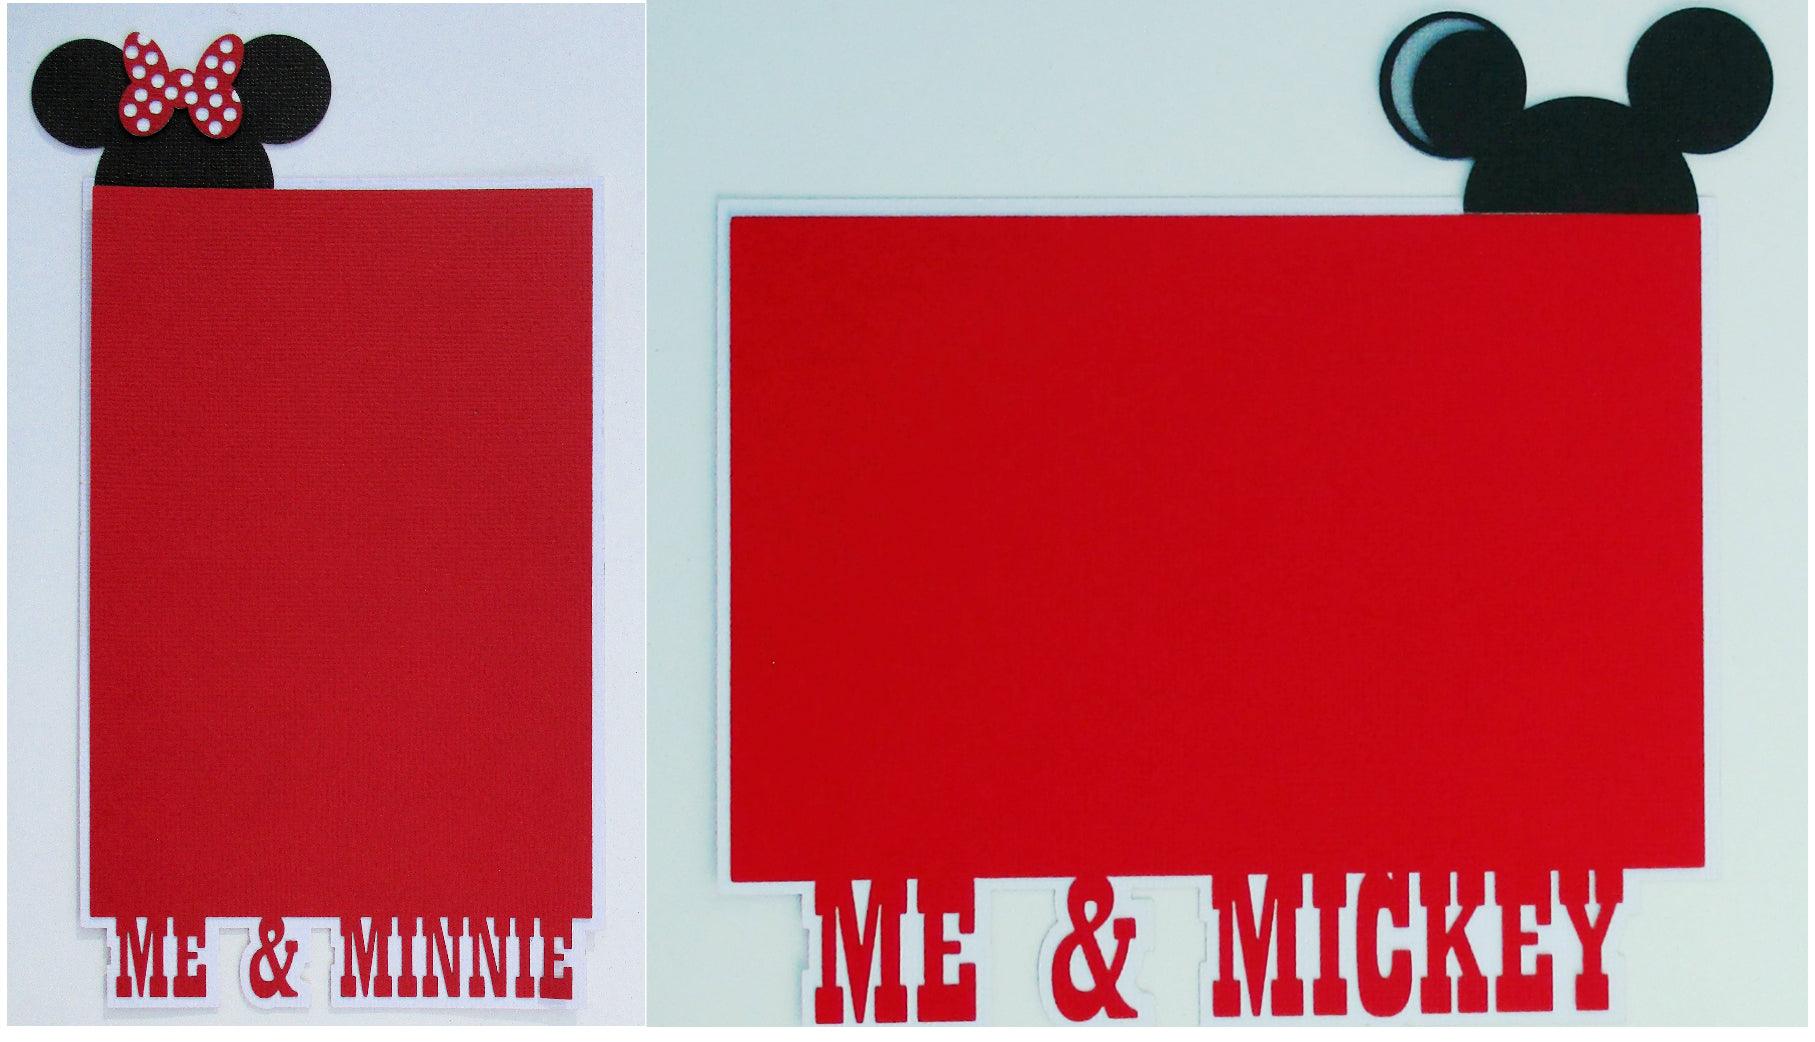 Disneyana Collection Mickey & Minnie Embellished 4 x 6 Photo Mats by SSC Laser Designs